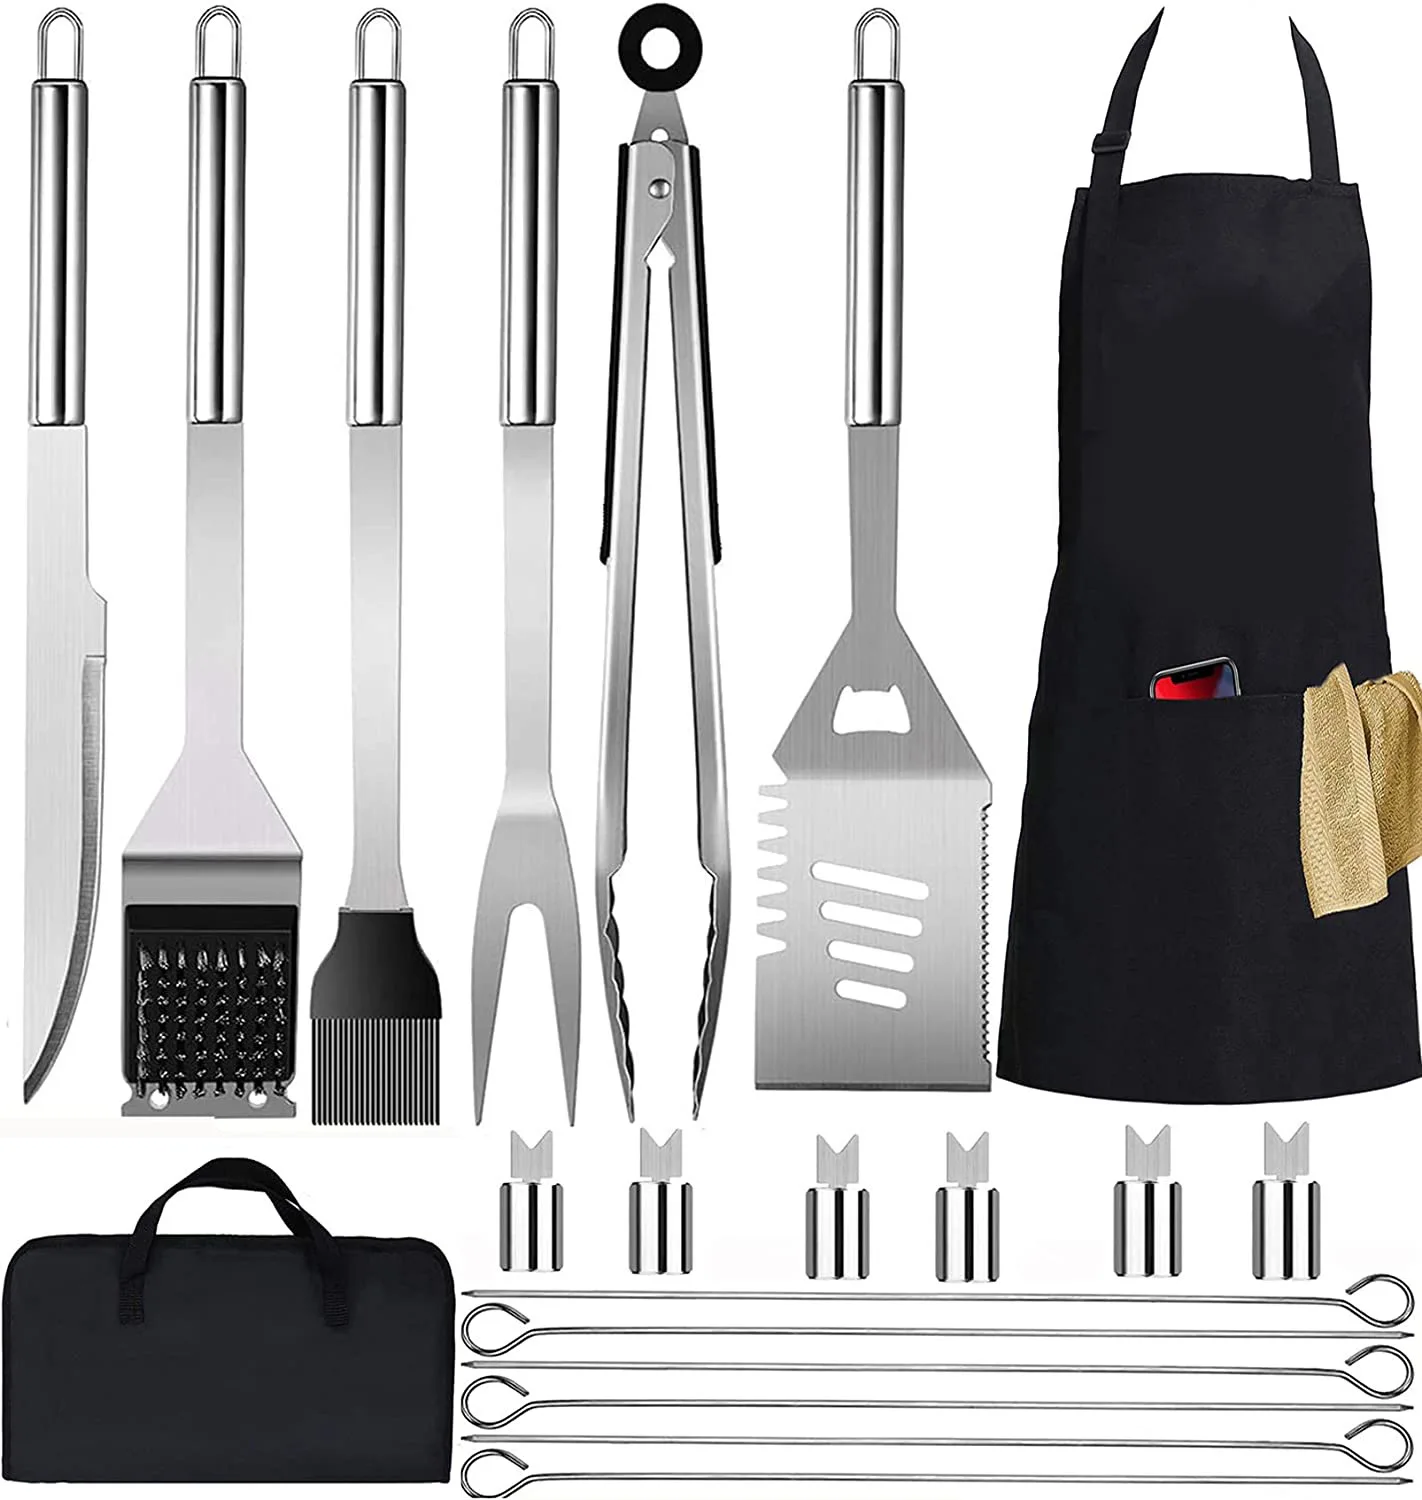 20 Piece Set BBQ Accessories Barbecue Set With Apron BBQ Barbecue Utensil Camping Outdoor Cooking Tool Set